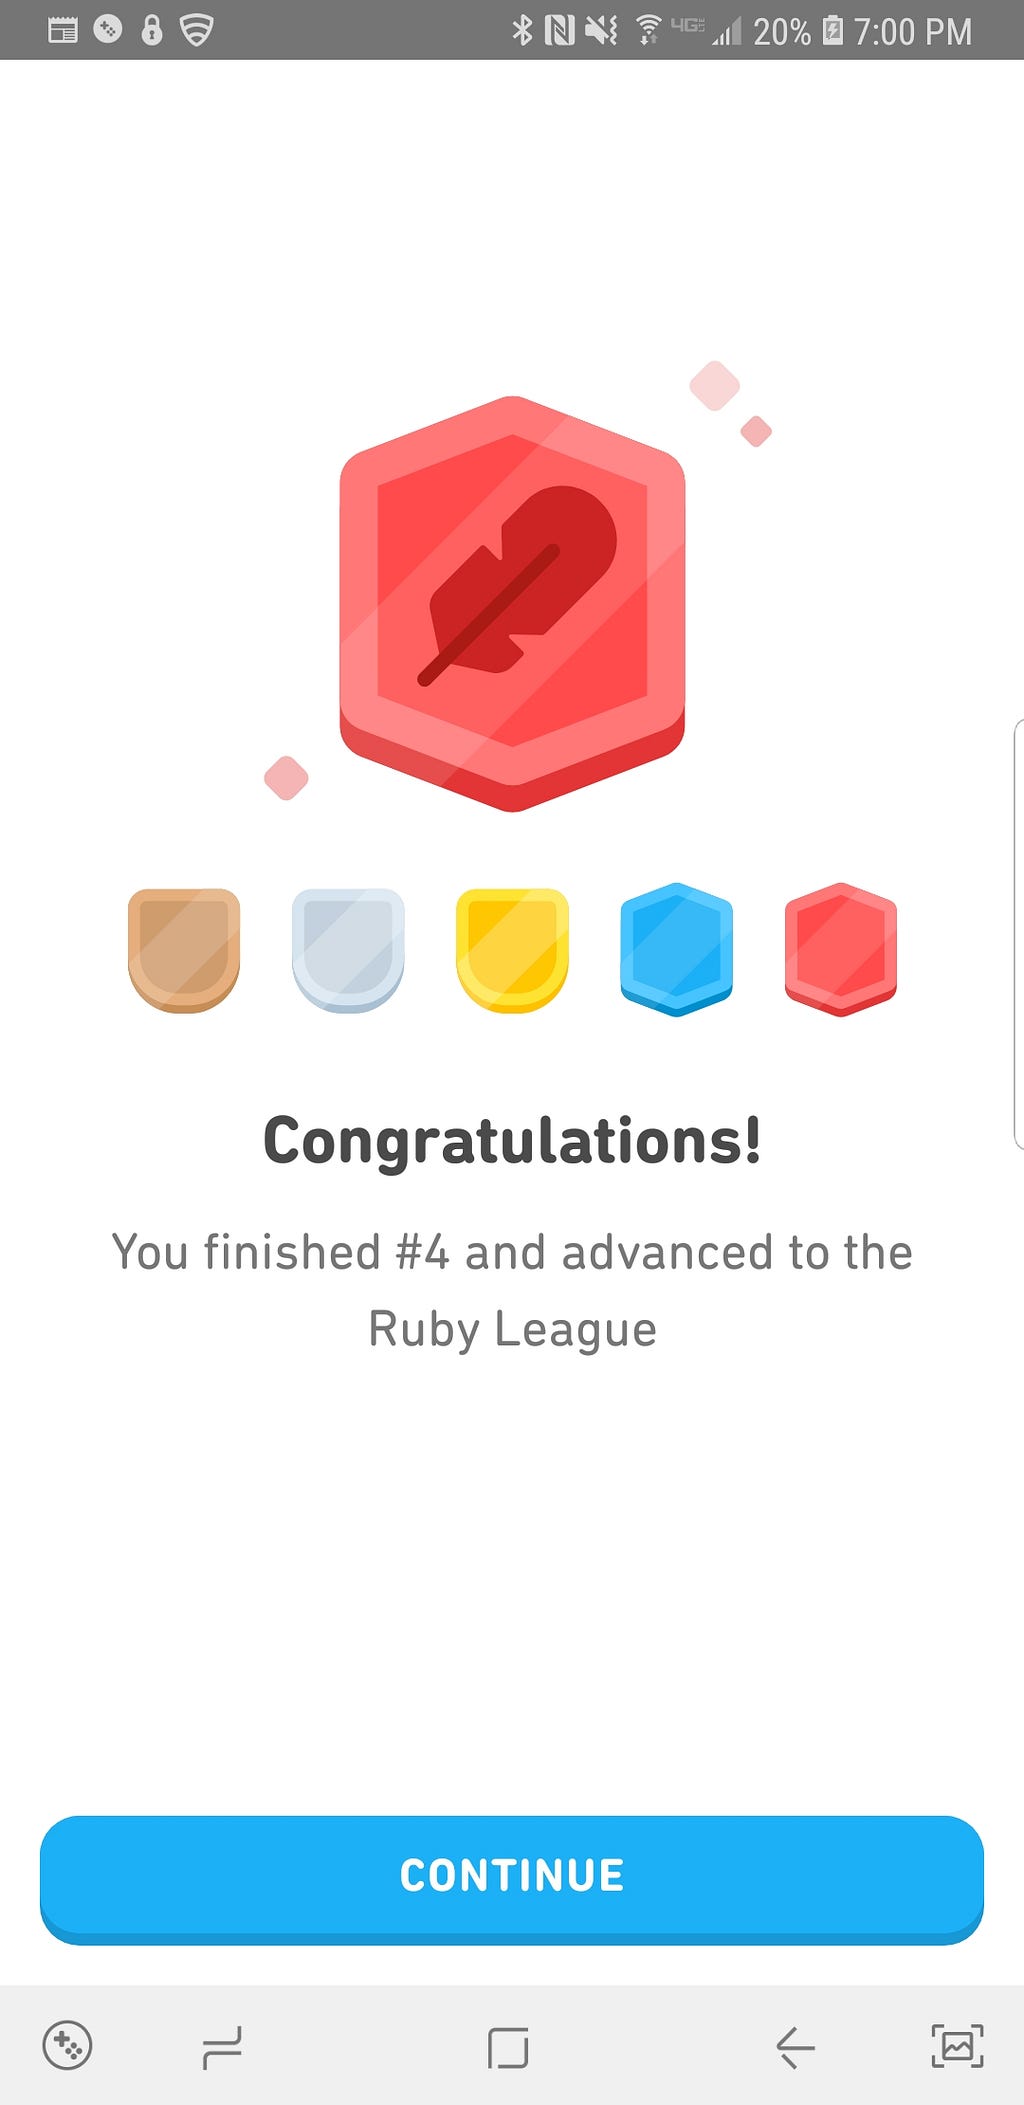 Screenshot of a success message in the app: “Congratulations! You finished #4 and advanced to the Ruby League